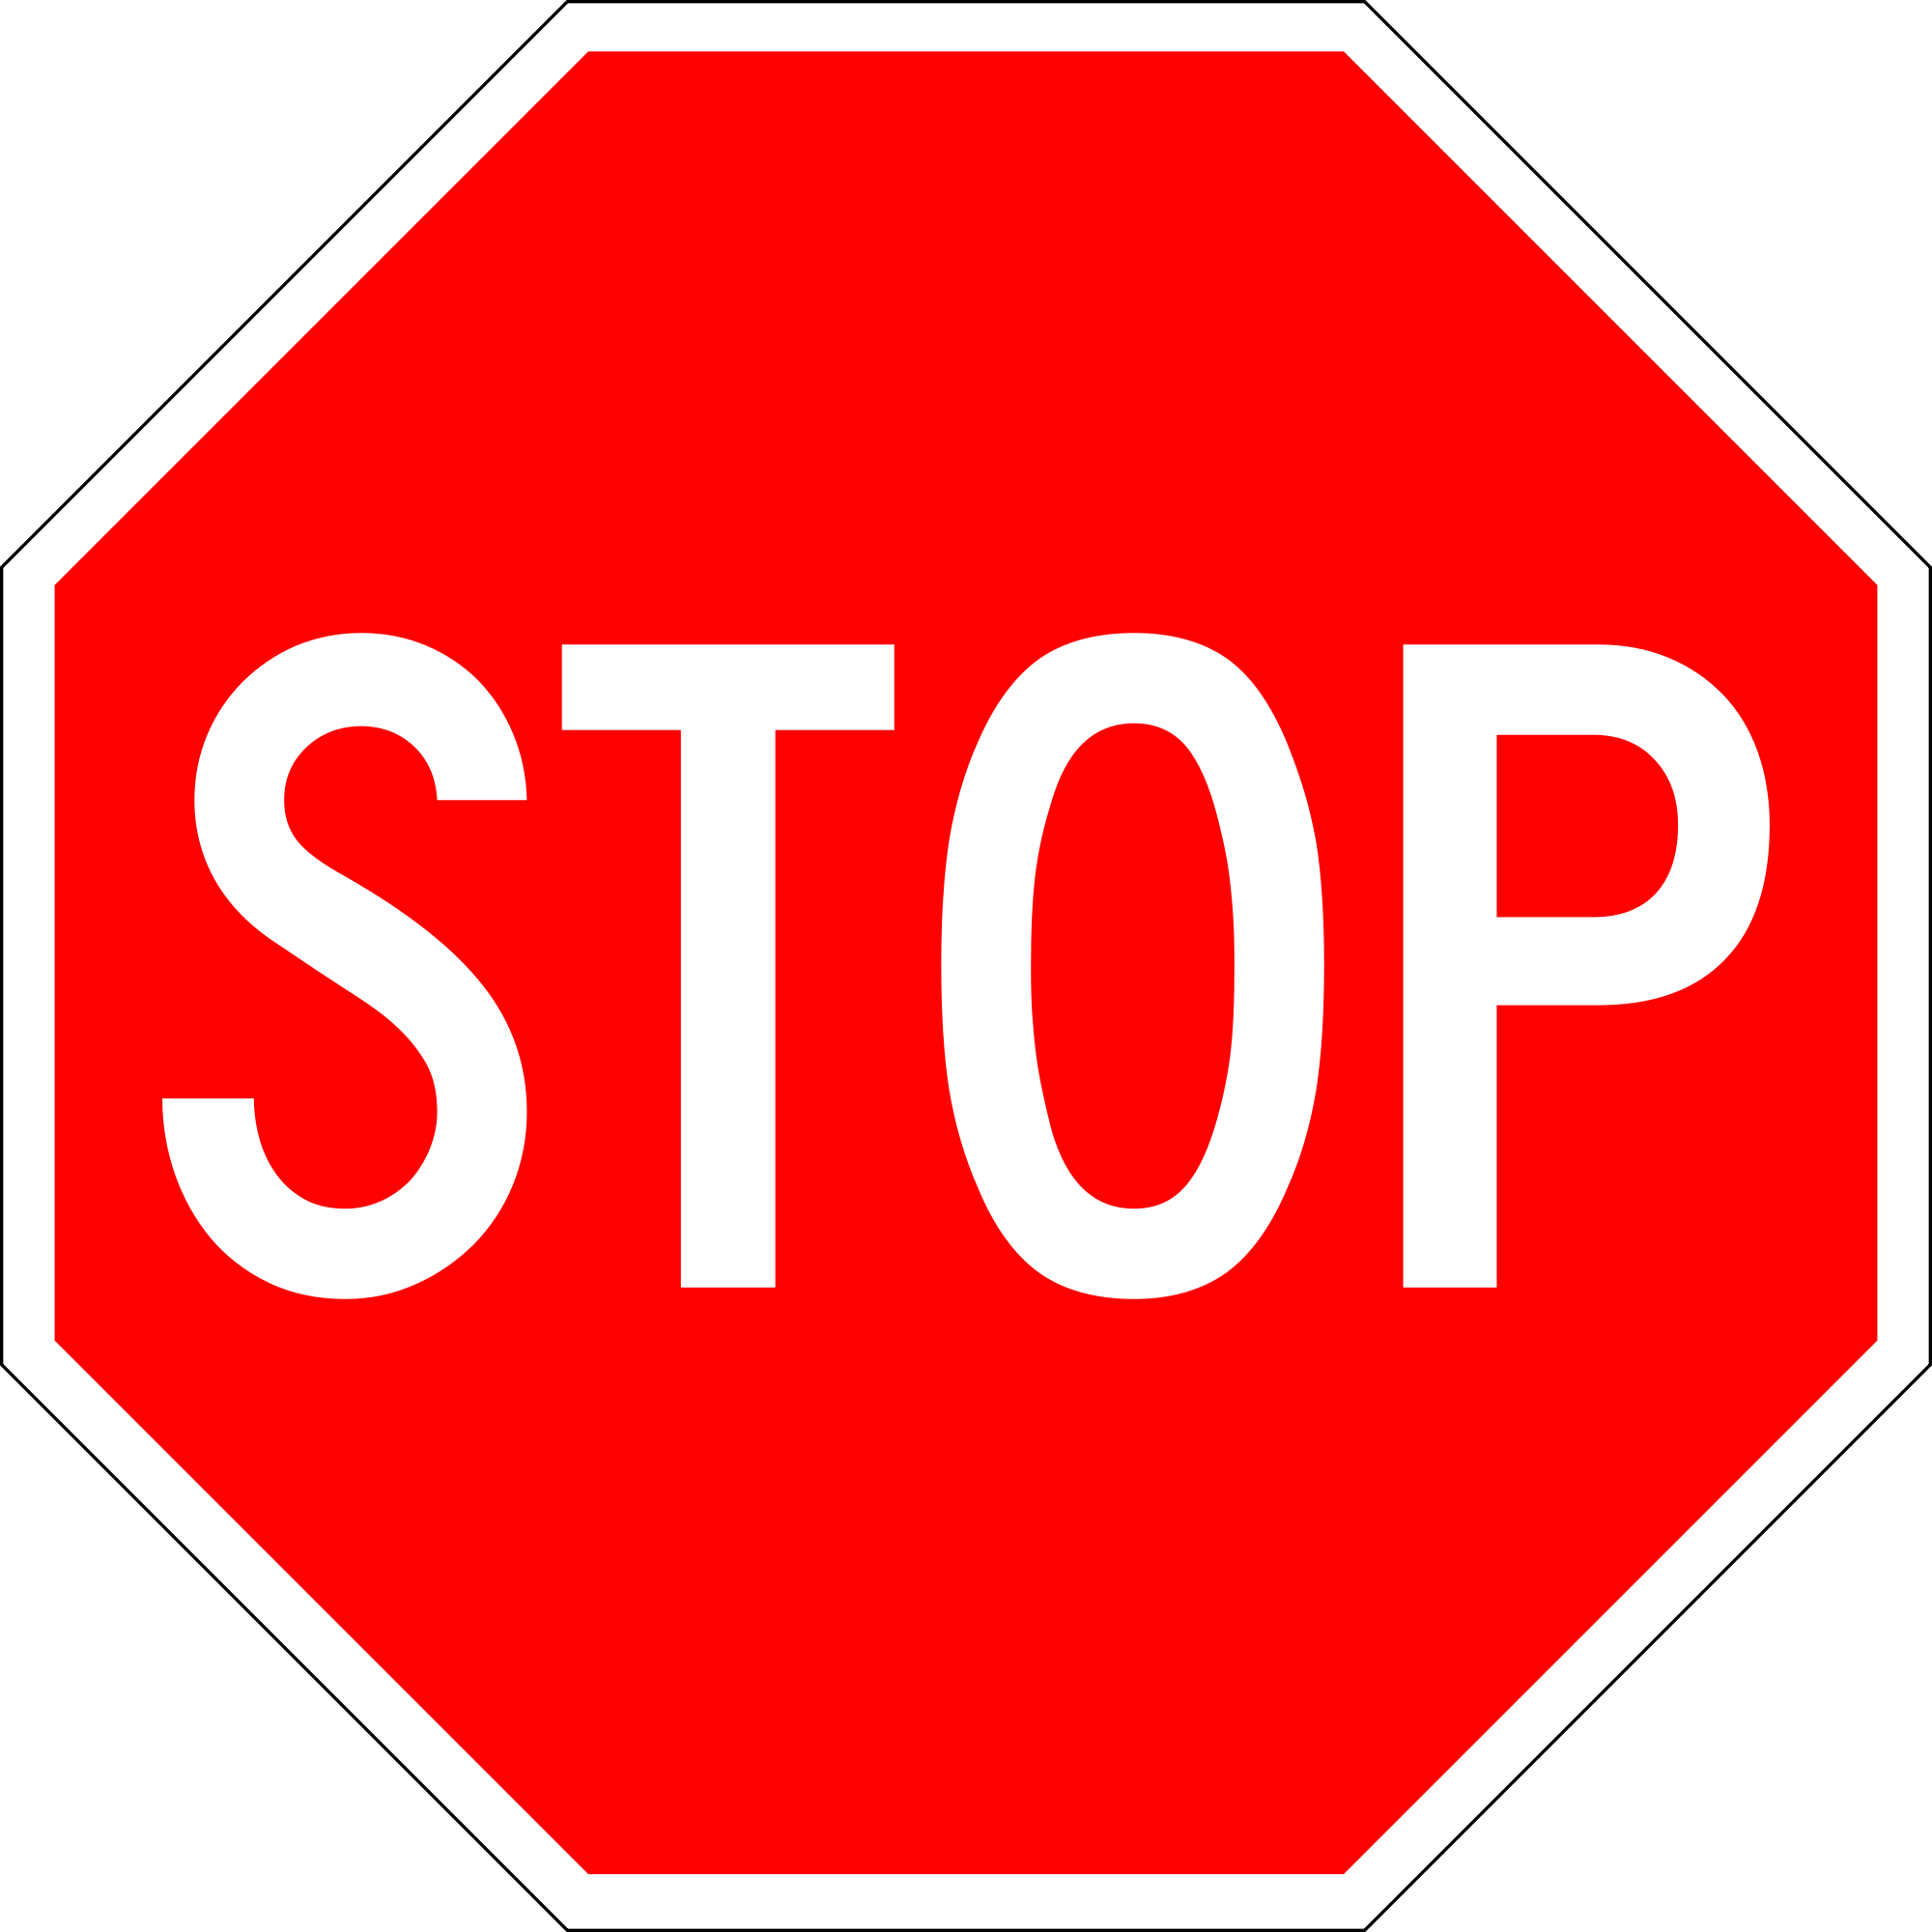 Stop clipart traffic. Sign transparent png stickpng